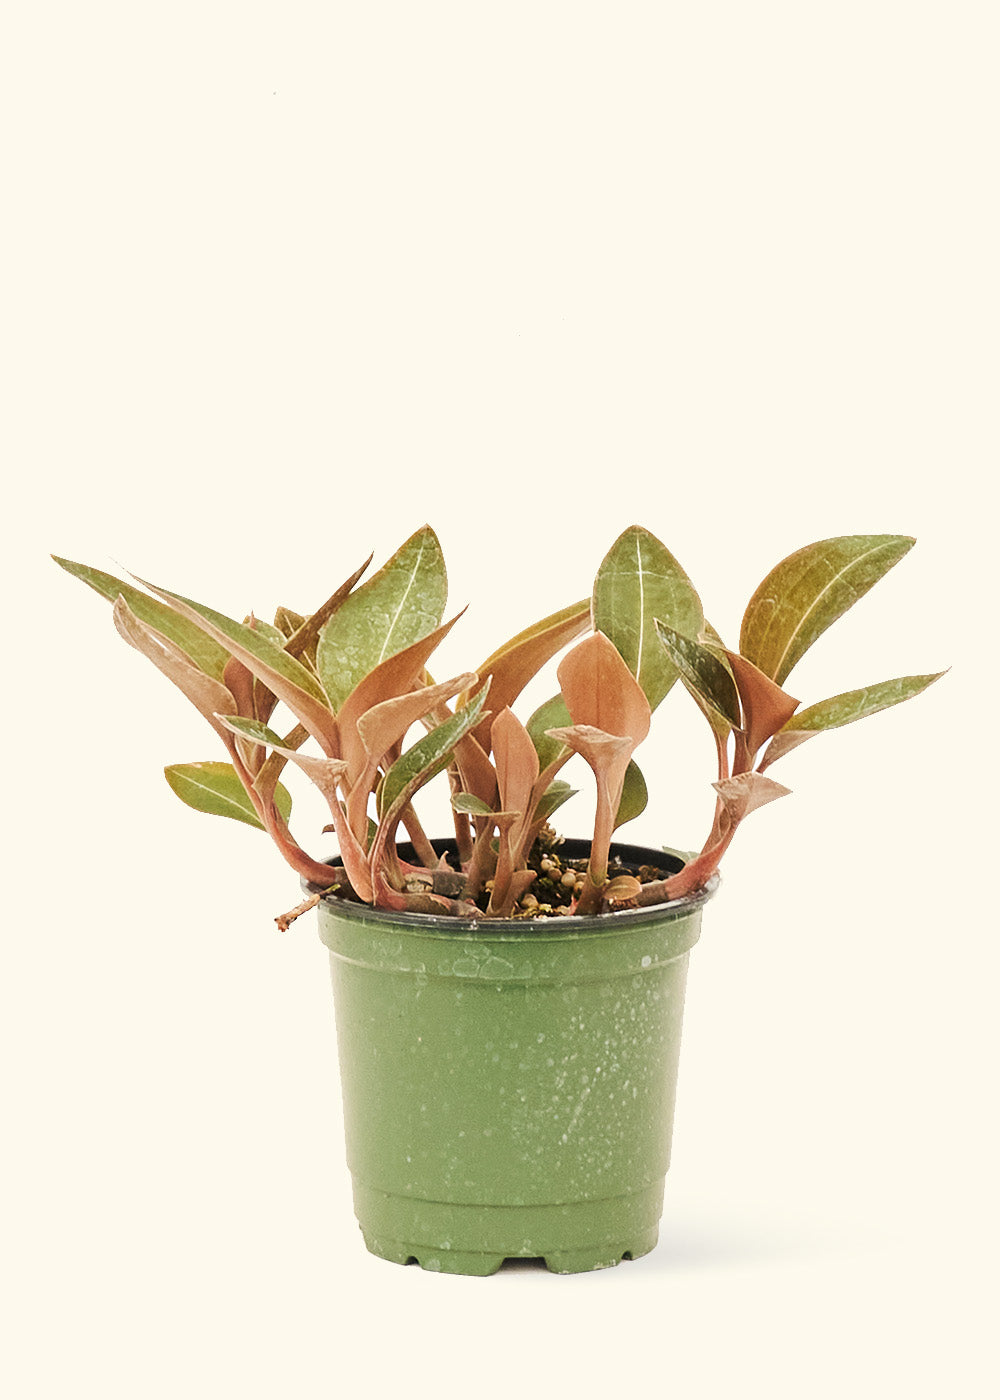 Small Black Jewel Orchid (Ludisia discolor) in a grow pot.